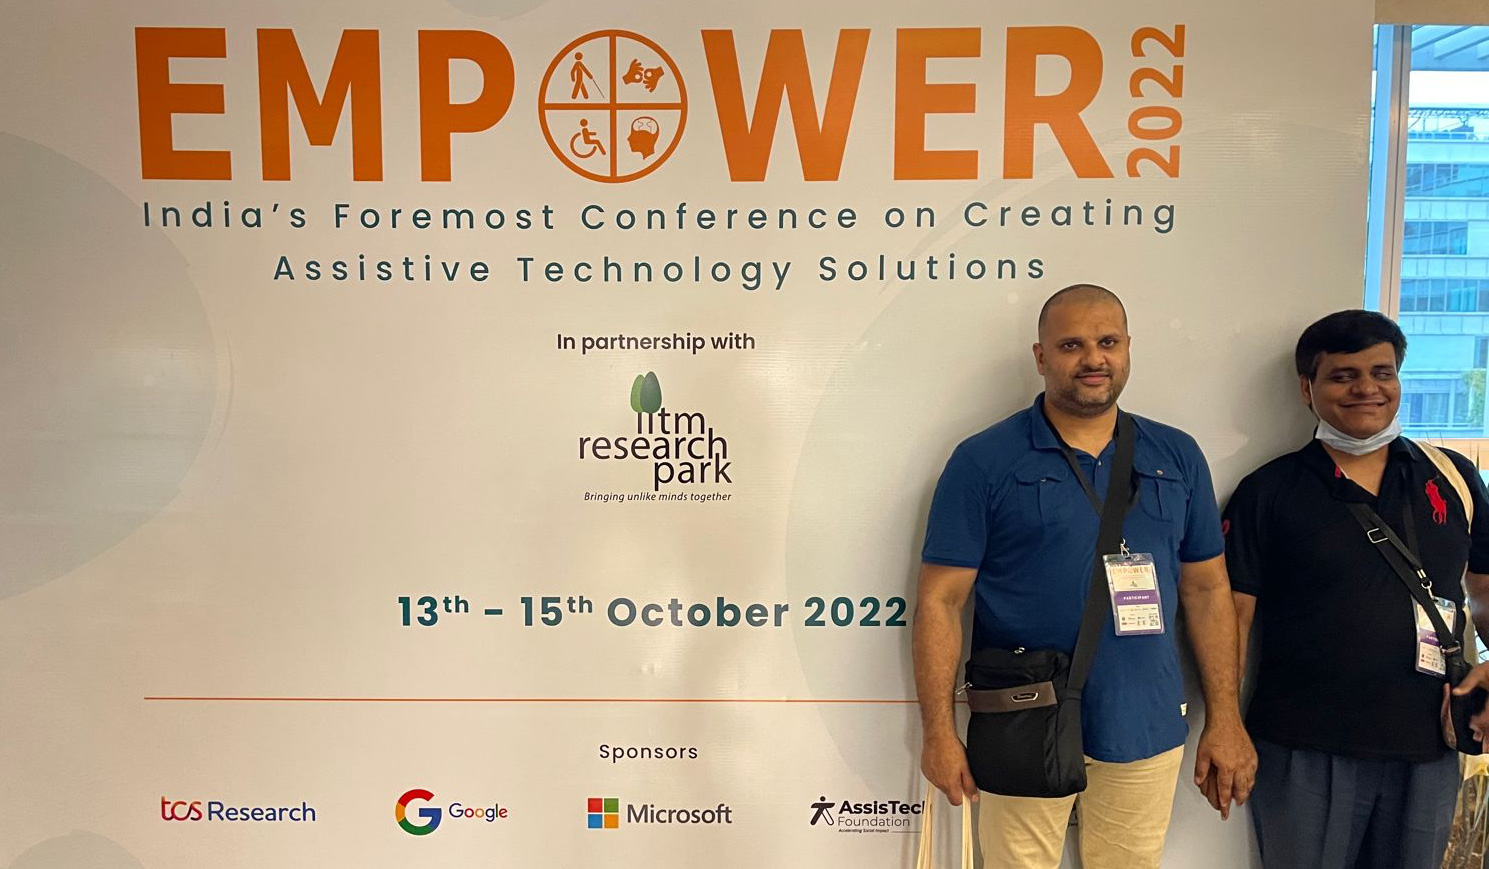 Sunil and Pradip standing in front of Empower 2022 Conference banner